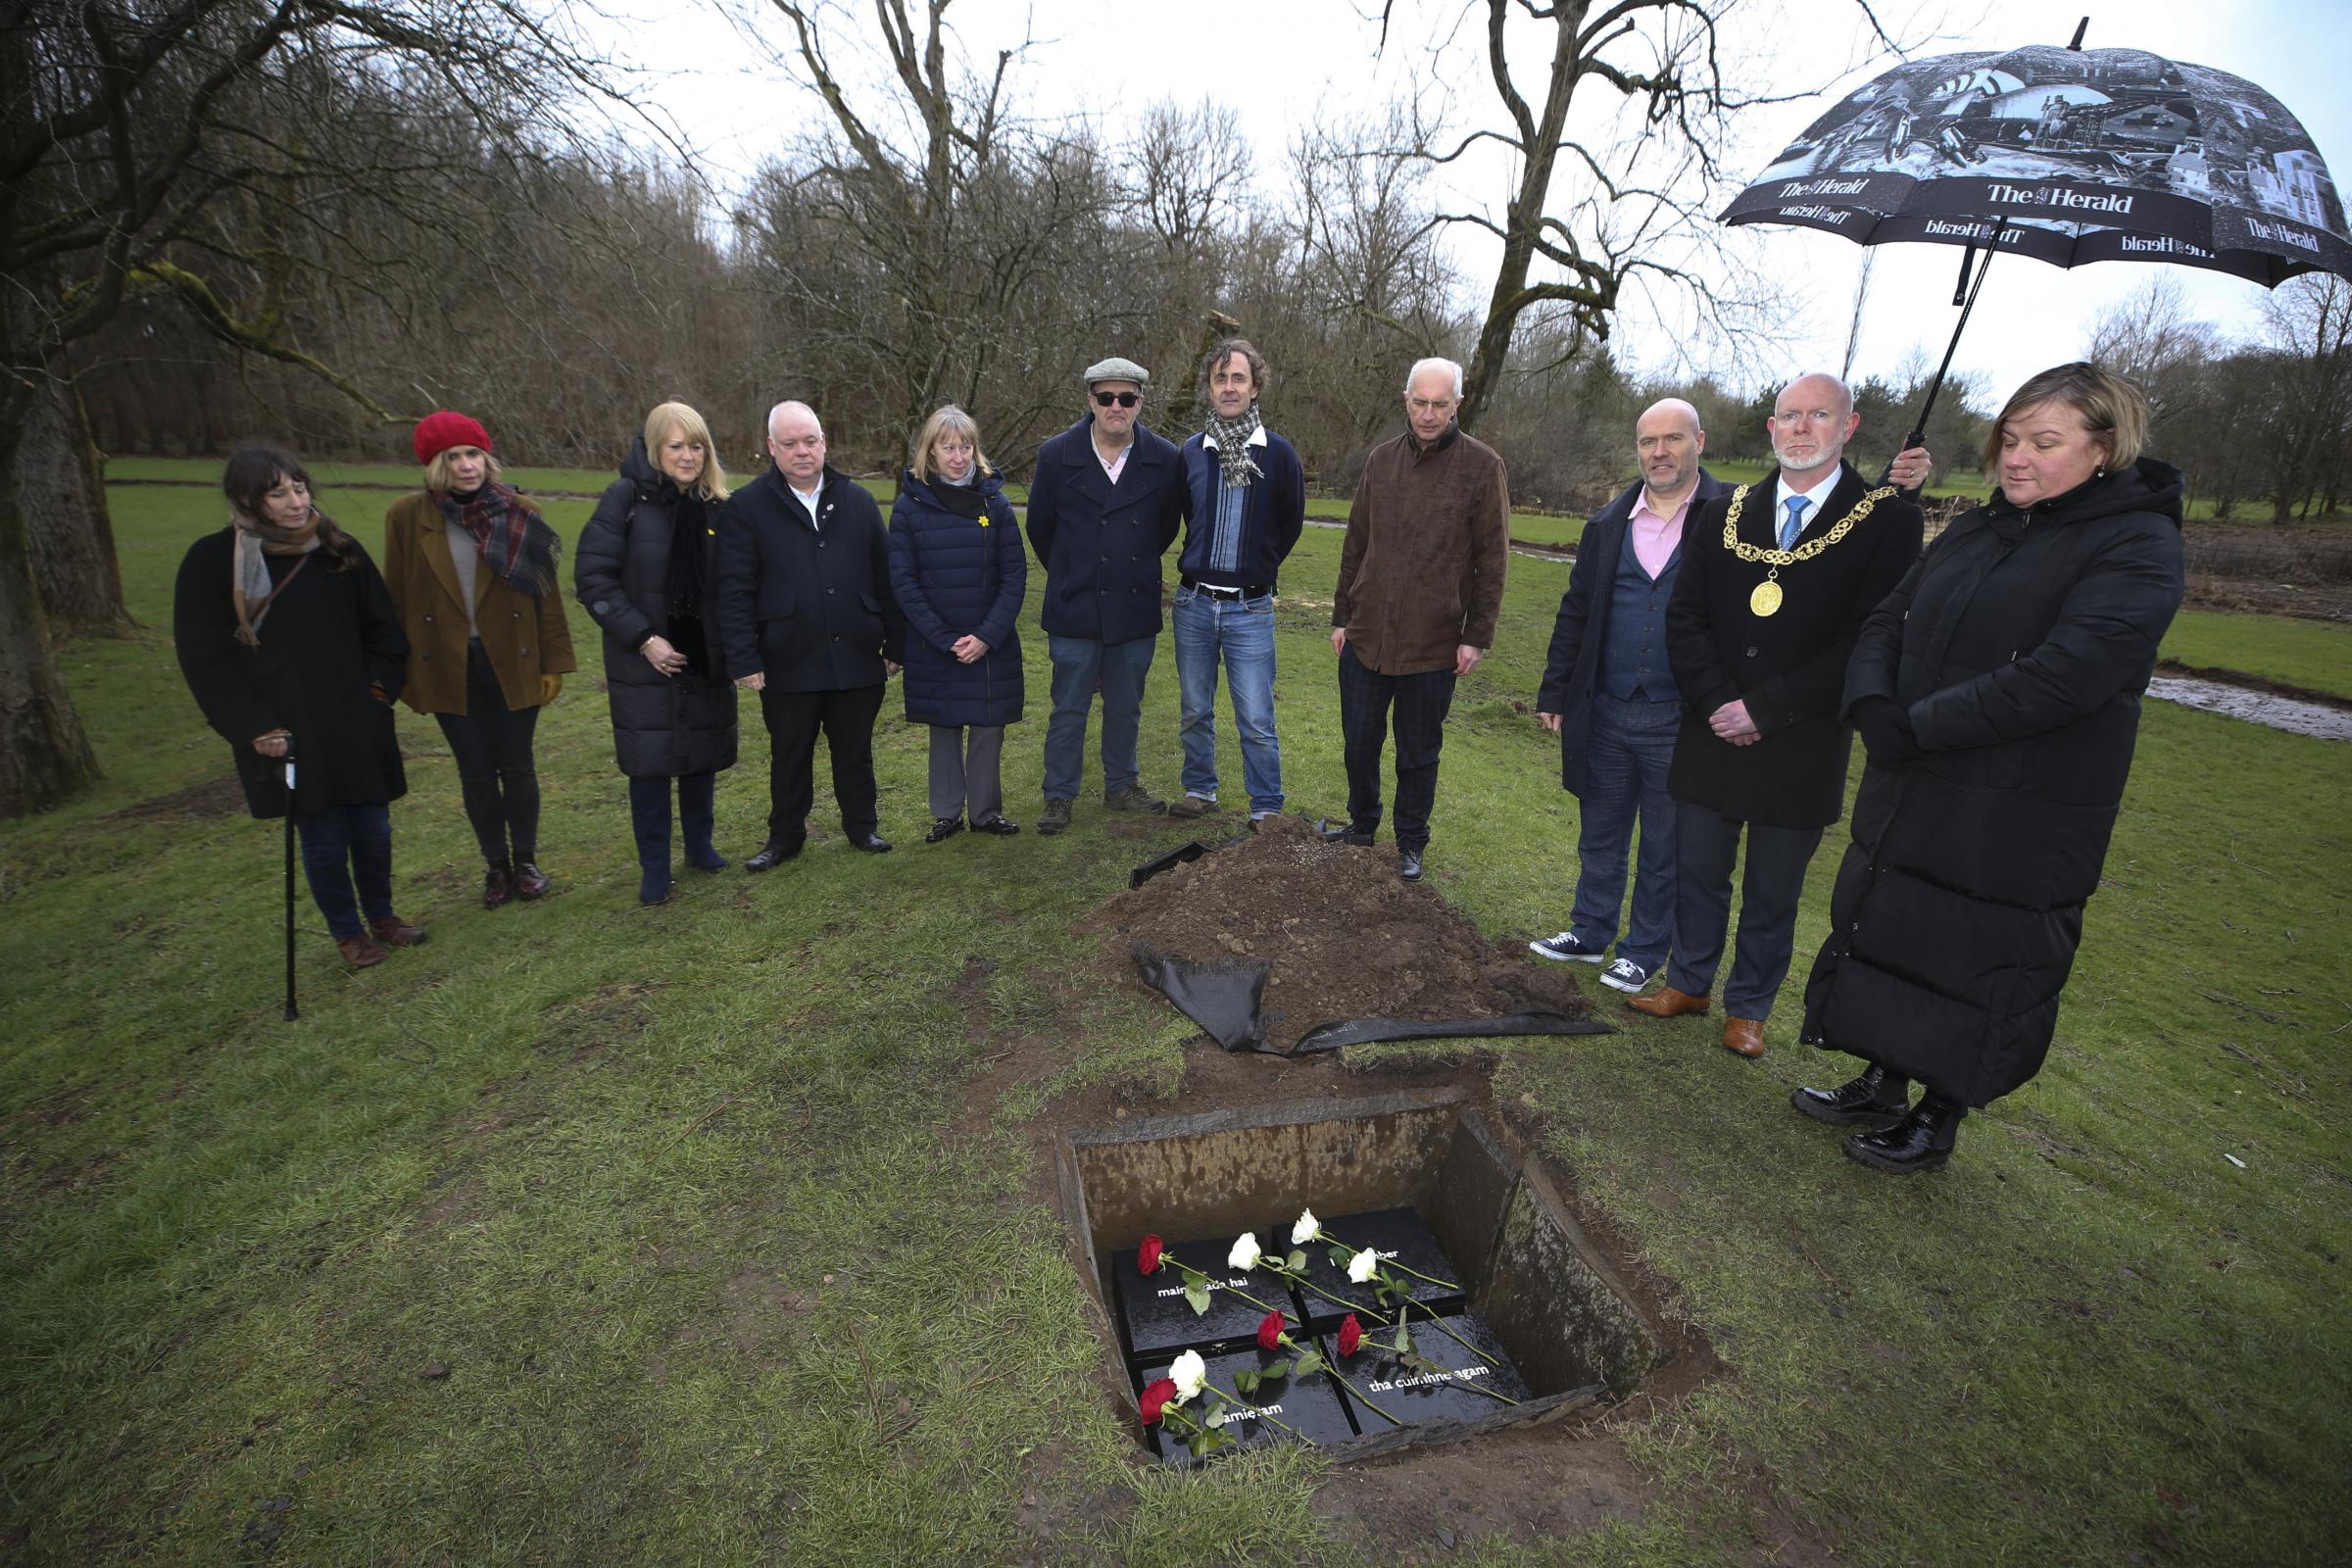 A private ceremony was held at the Riverside Grove site at Pollok Country Park as boxes of I remembers were buried in a kist